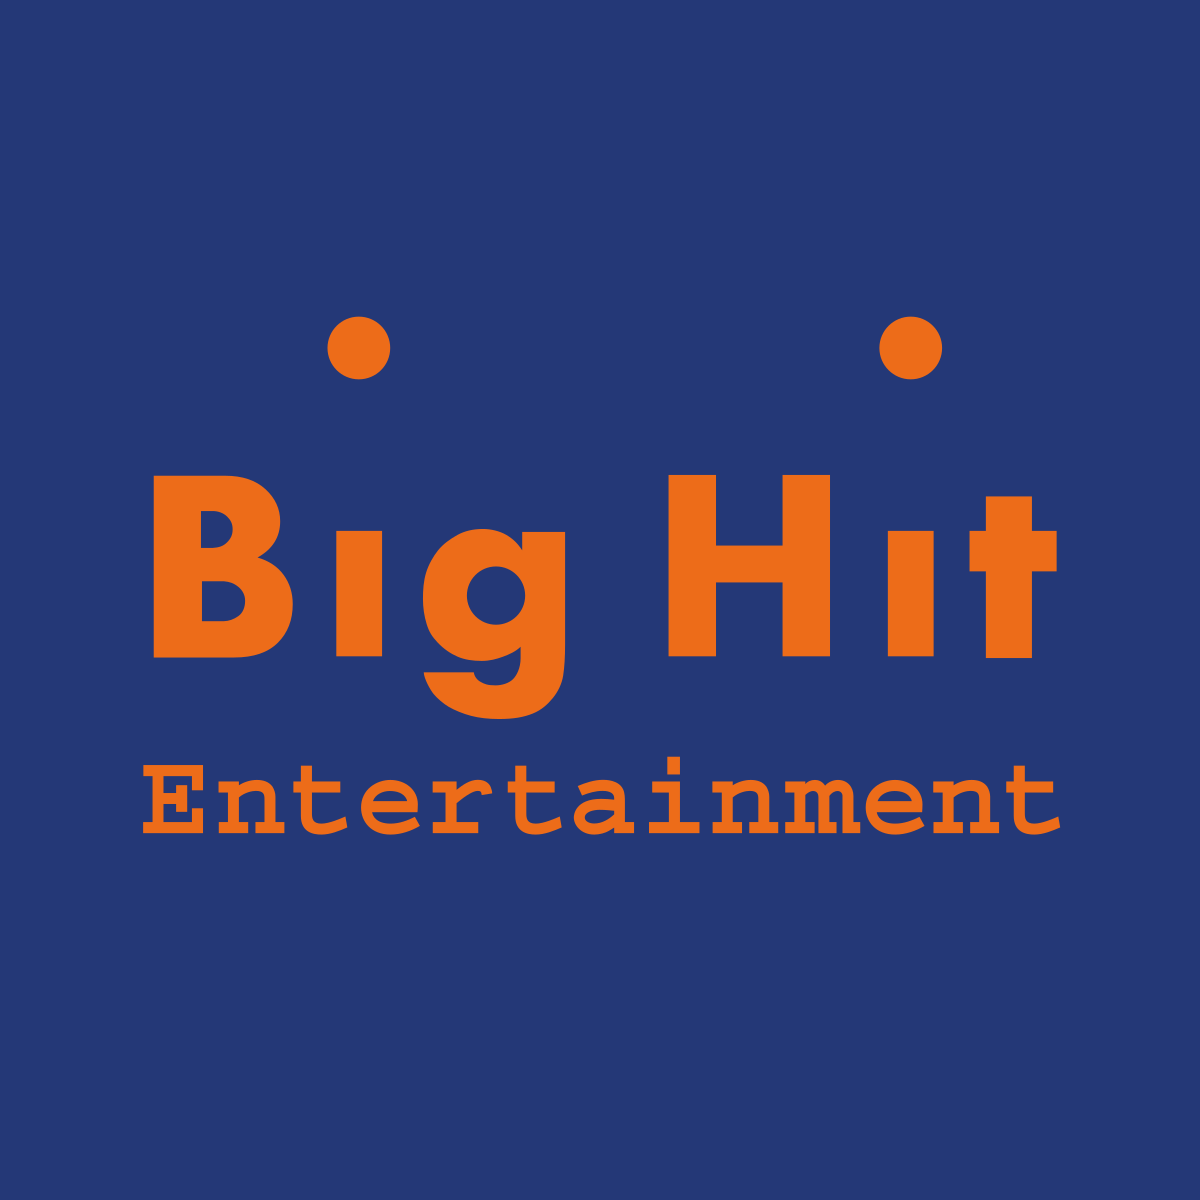 BIGHIT Entertainment may be planning to go public